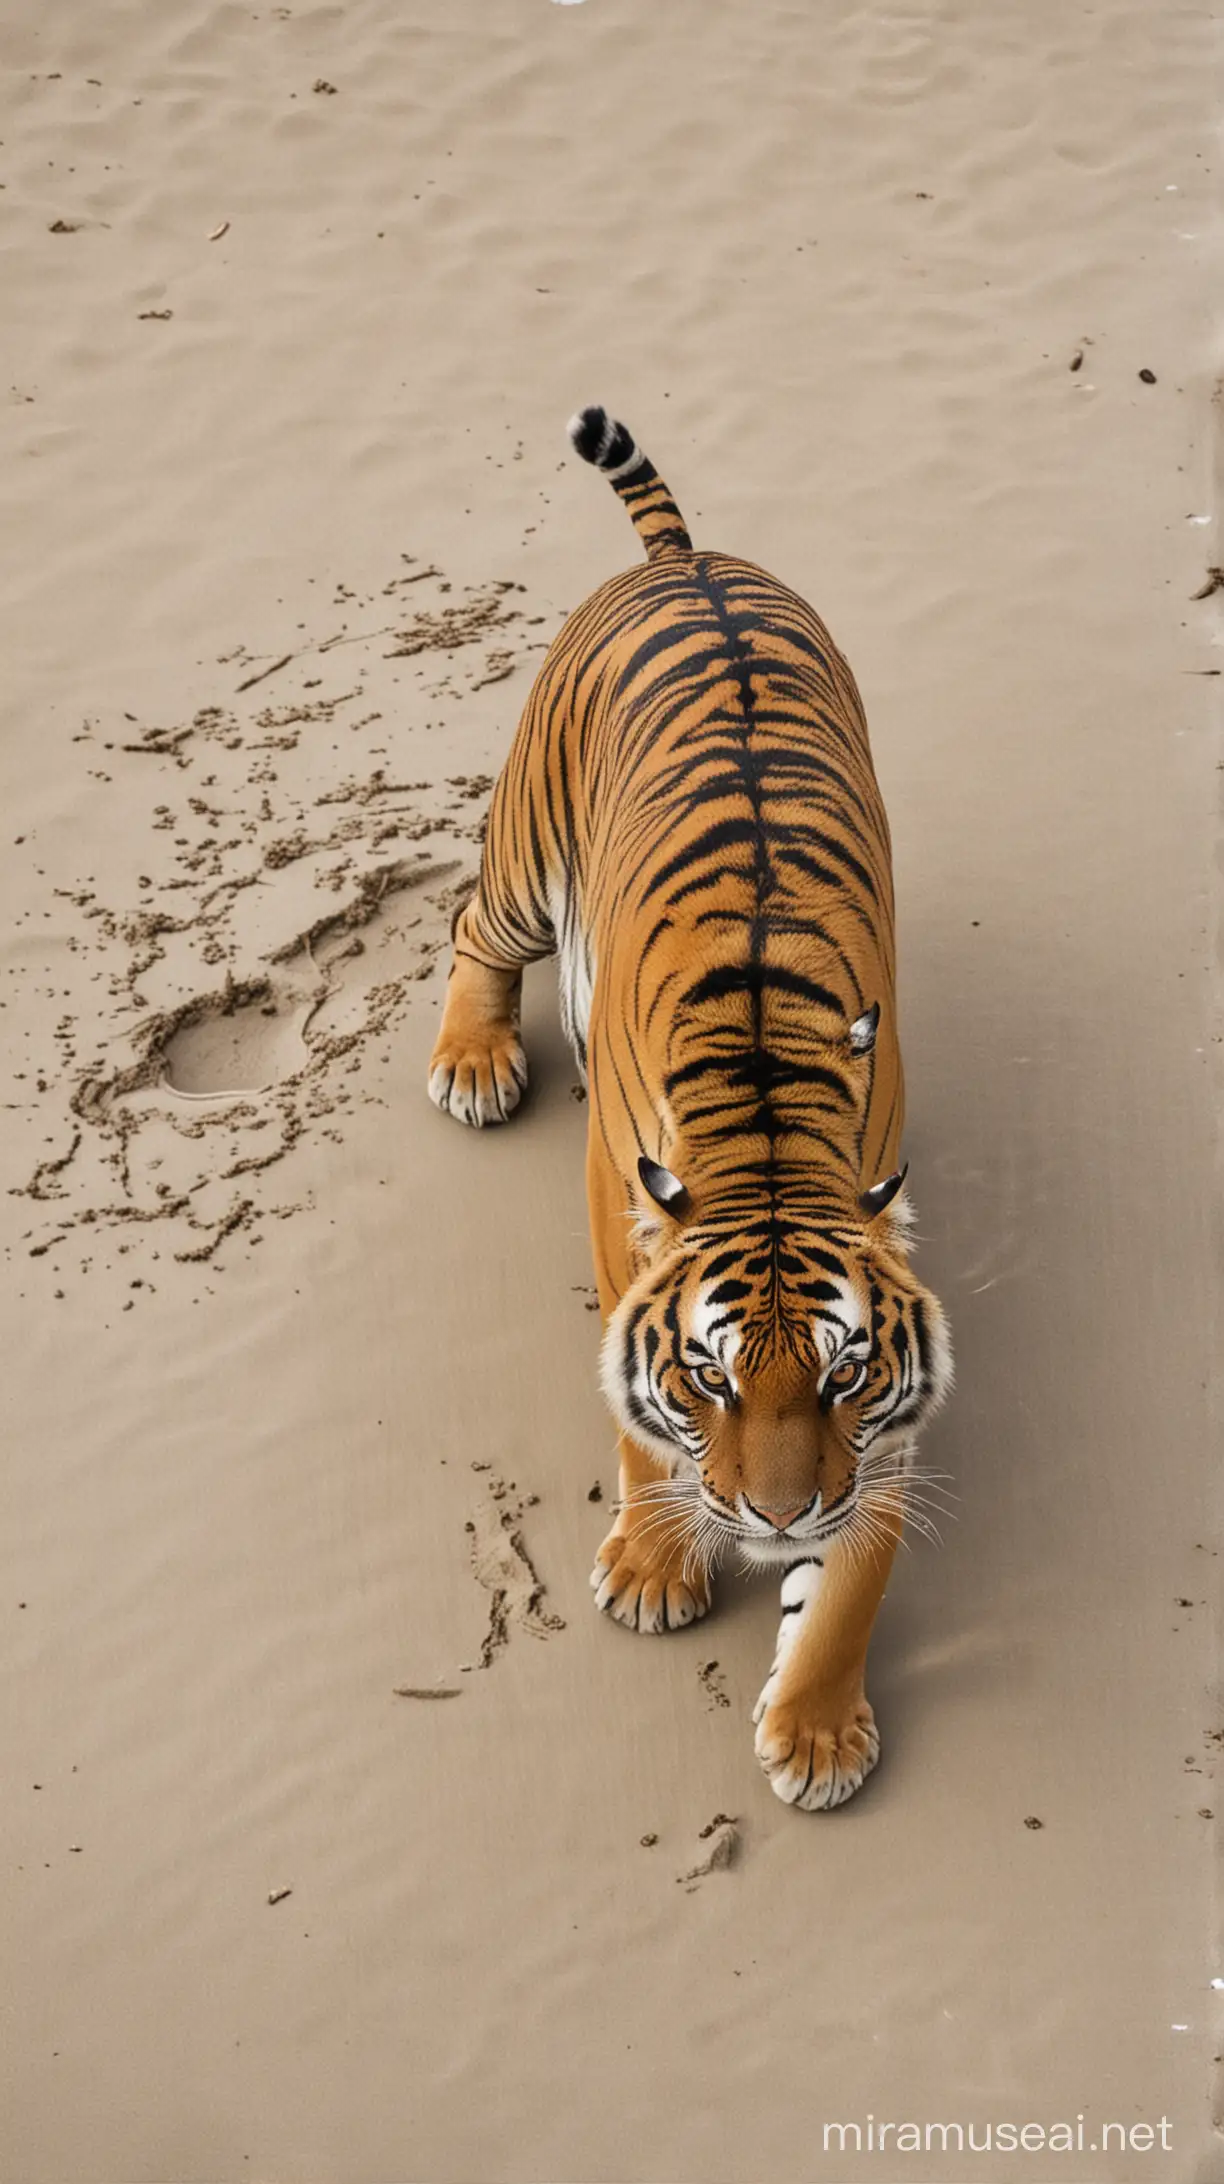 The tiger was on the beach, many people saw it